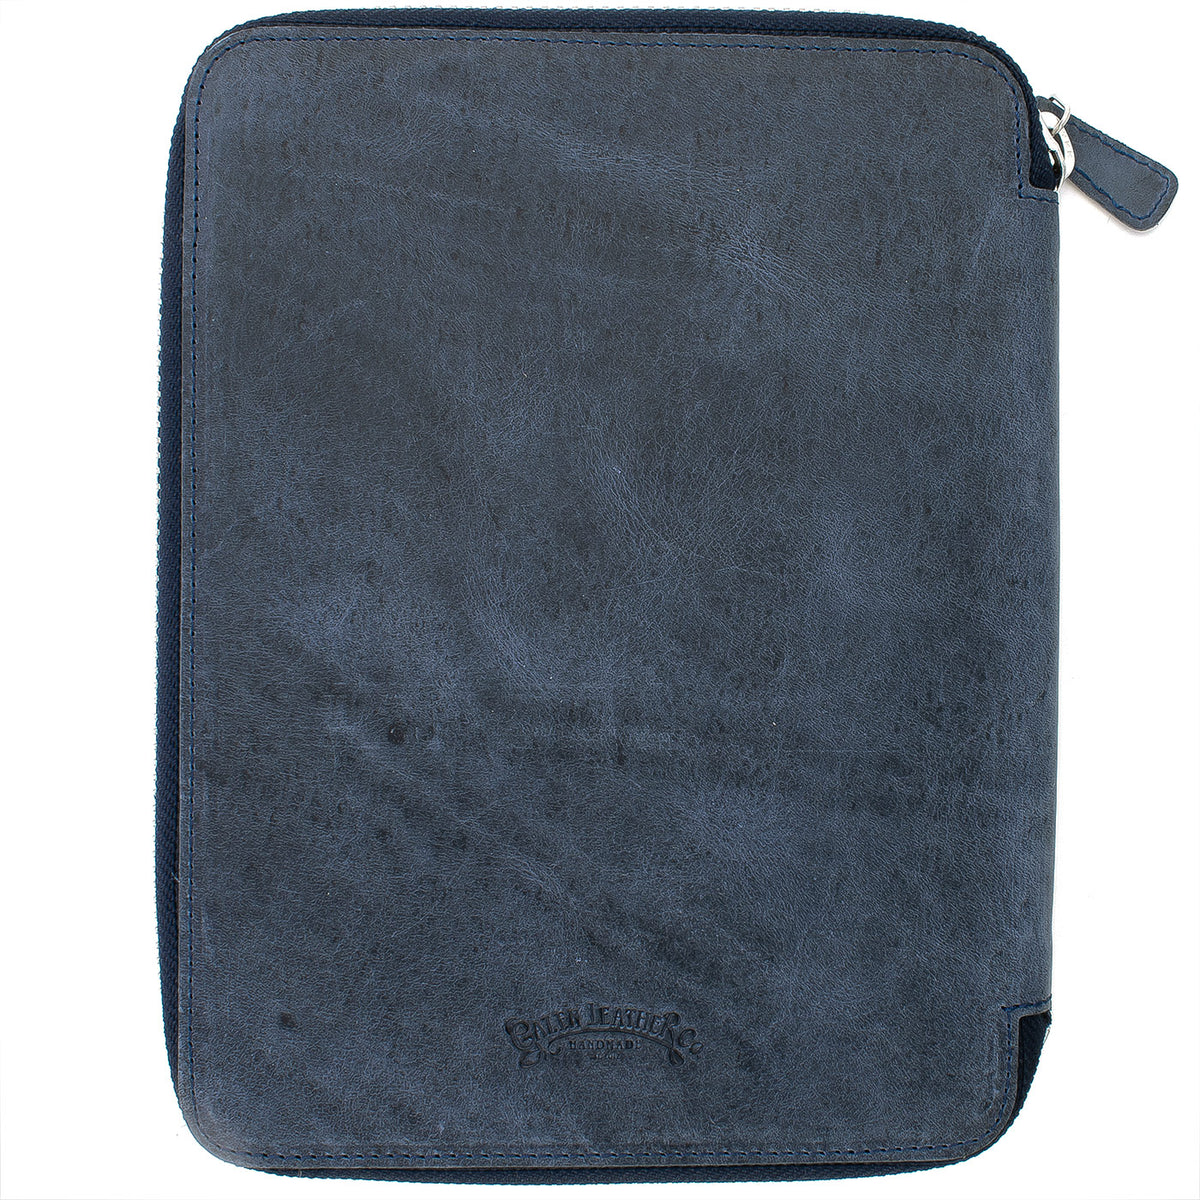 Galen Leather Co. Zippered A5 Notebook Folio- Crazy Horse Navy Blue